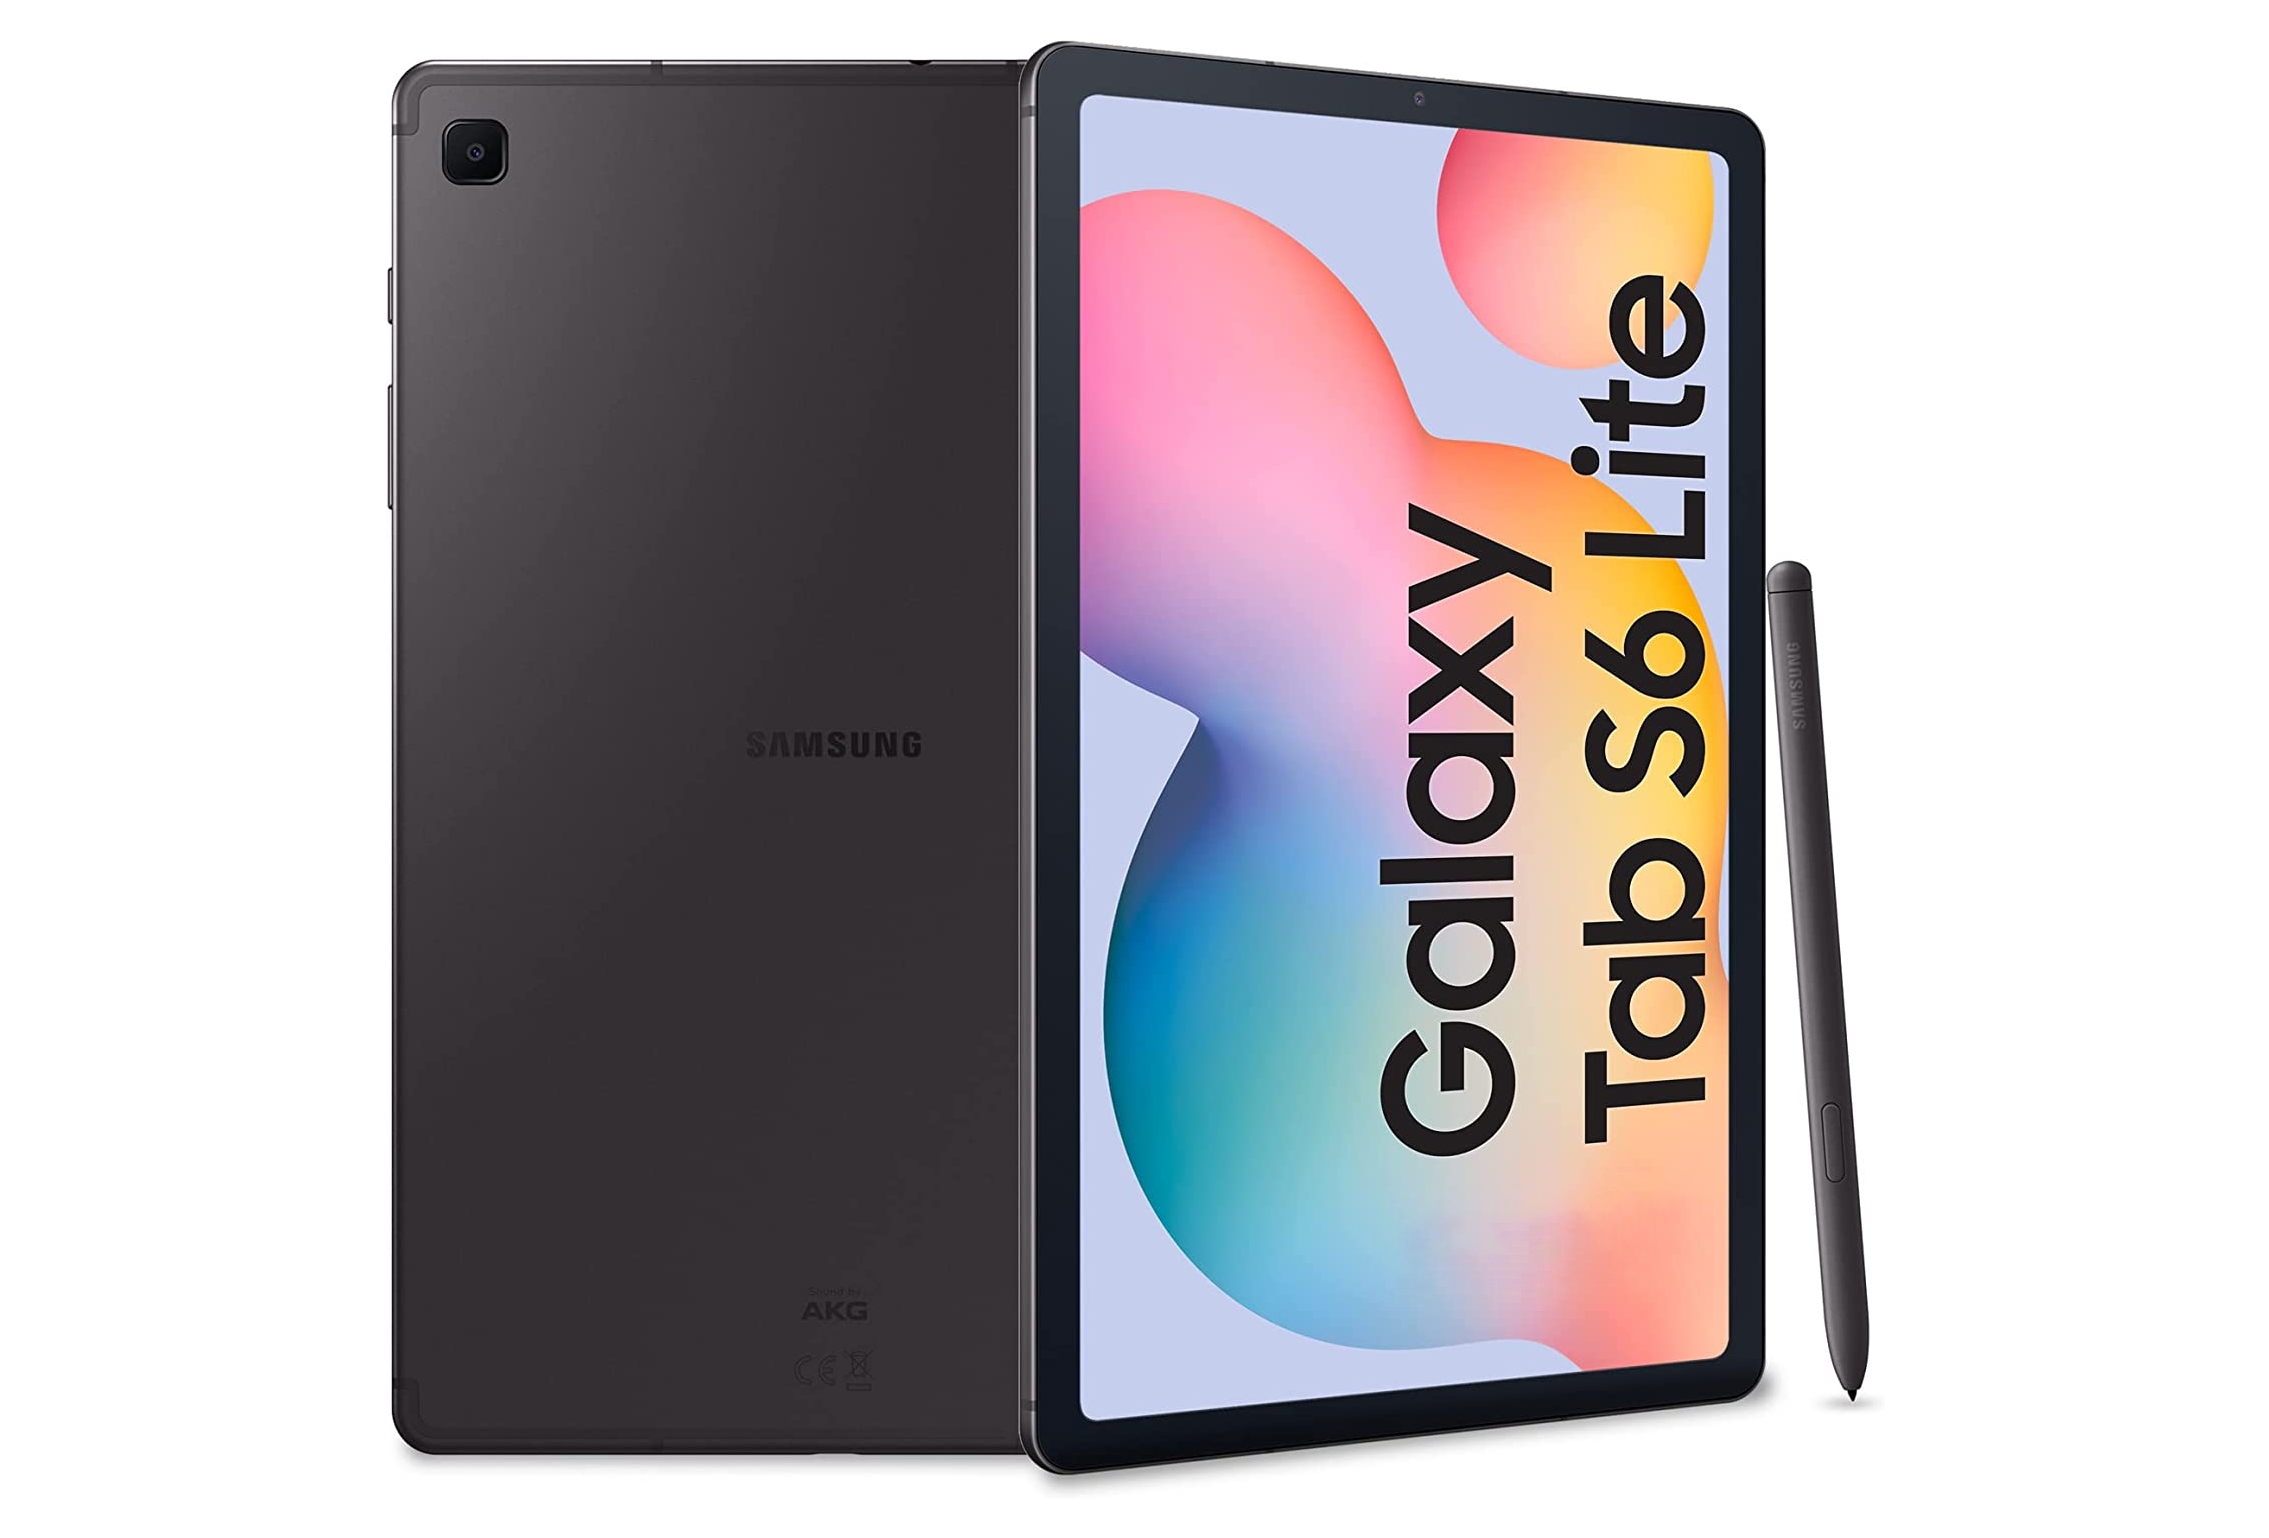 $135 off: Samsung Galaxy Tab S6 Lite with 10.4″ display, Exynos 9611 chip and S Pen support on sale on Amazon for a special price